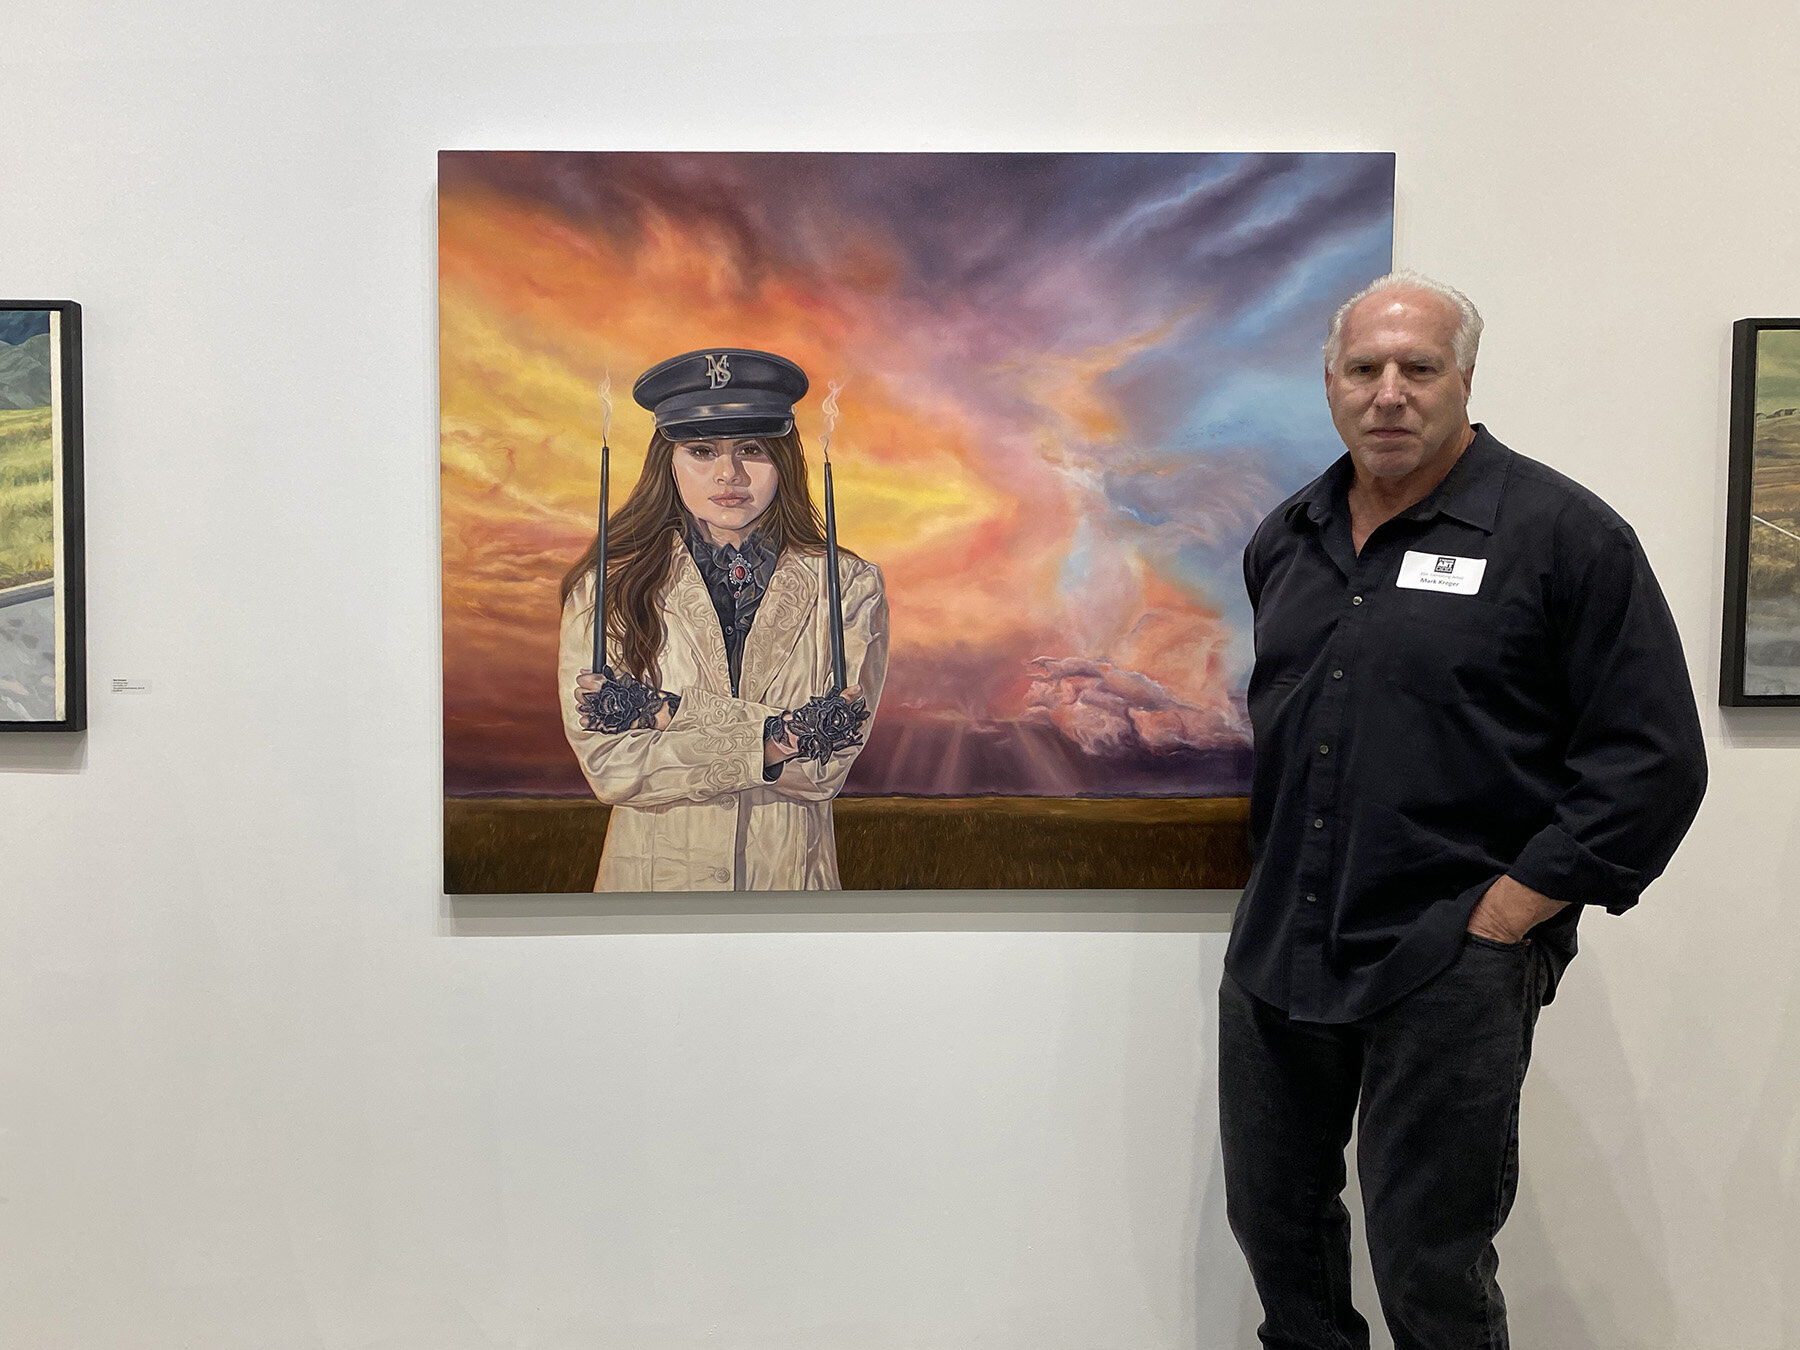   Mark Kreger  with his painting “Final Promise” 